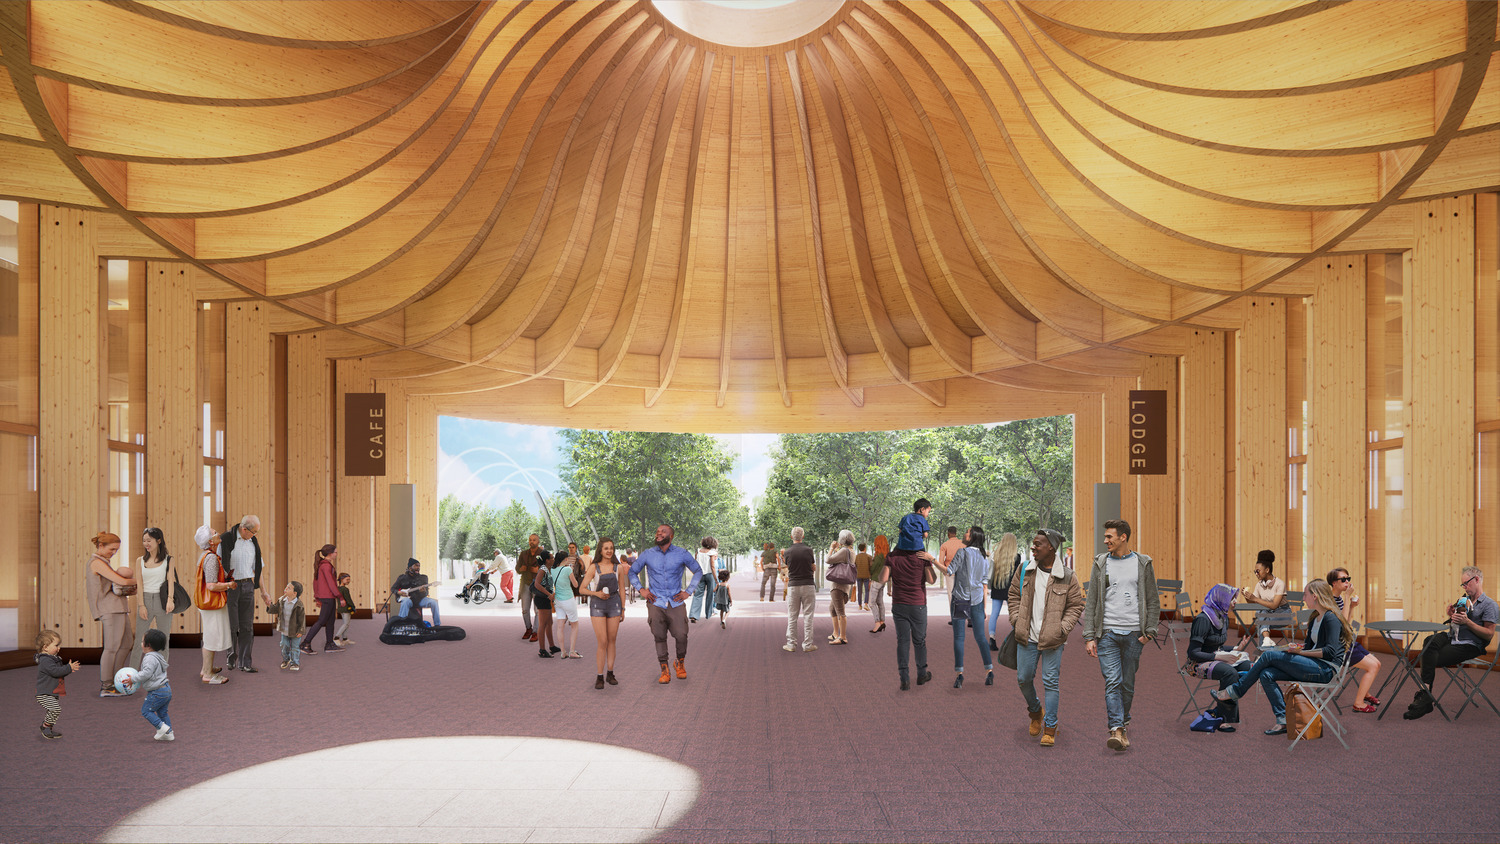 <p>The breezeway roof rises dramatically at the center, creating an iconic vaulted gateway that will make the structure visible and welcoming from surrounding areas. &nbsp;<br /><br><small>&copy; KieranTimberlake</small></p>